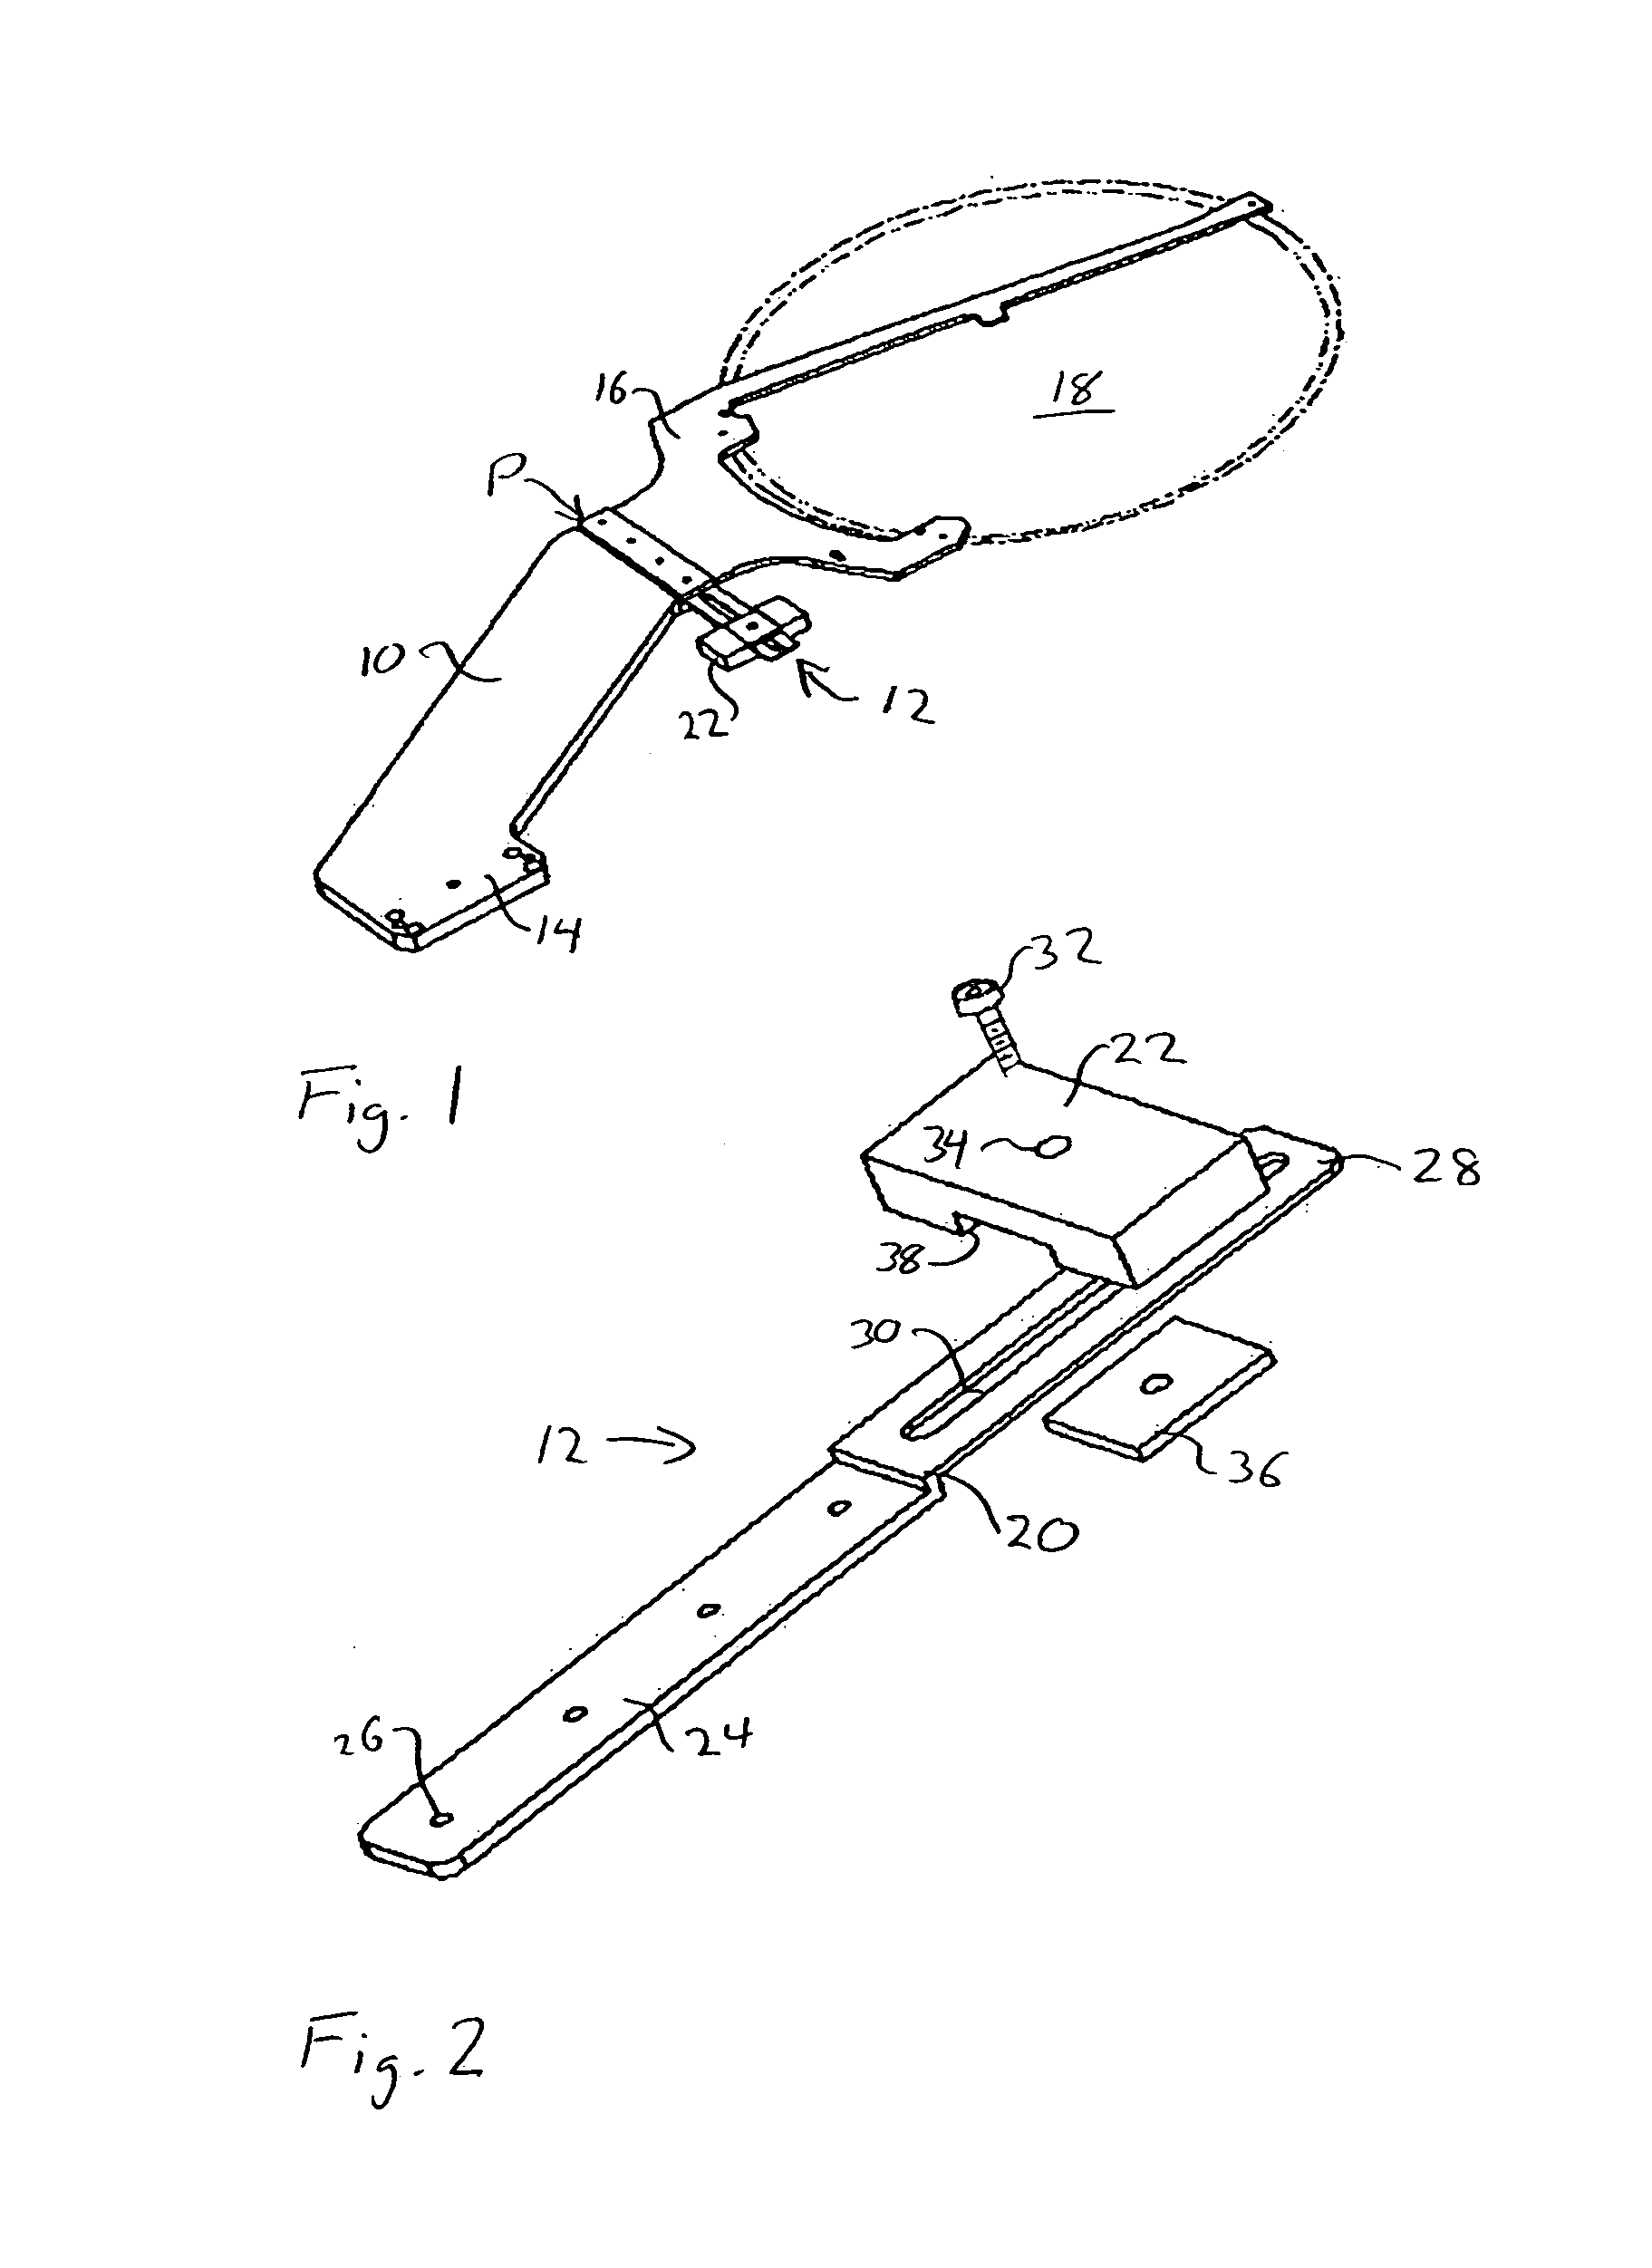 Method and apparatus for damping vibrations in a semiconductor wafer handling arm